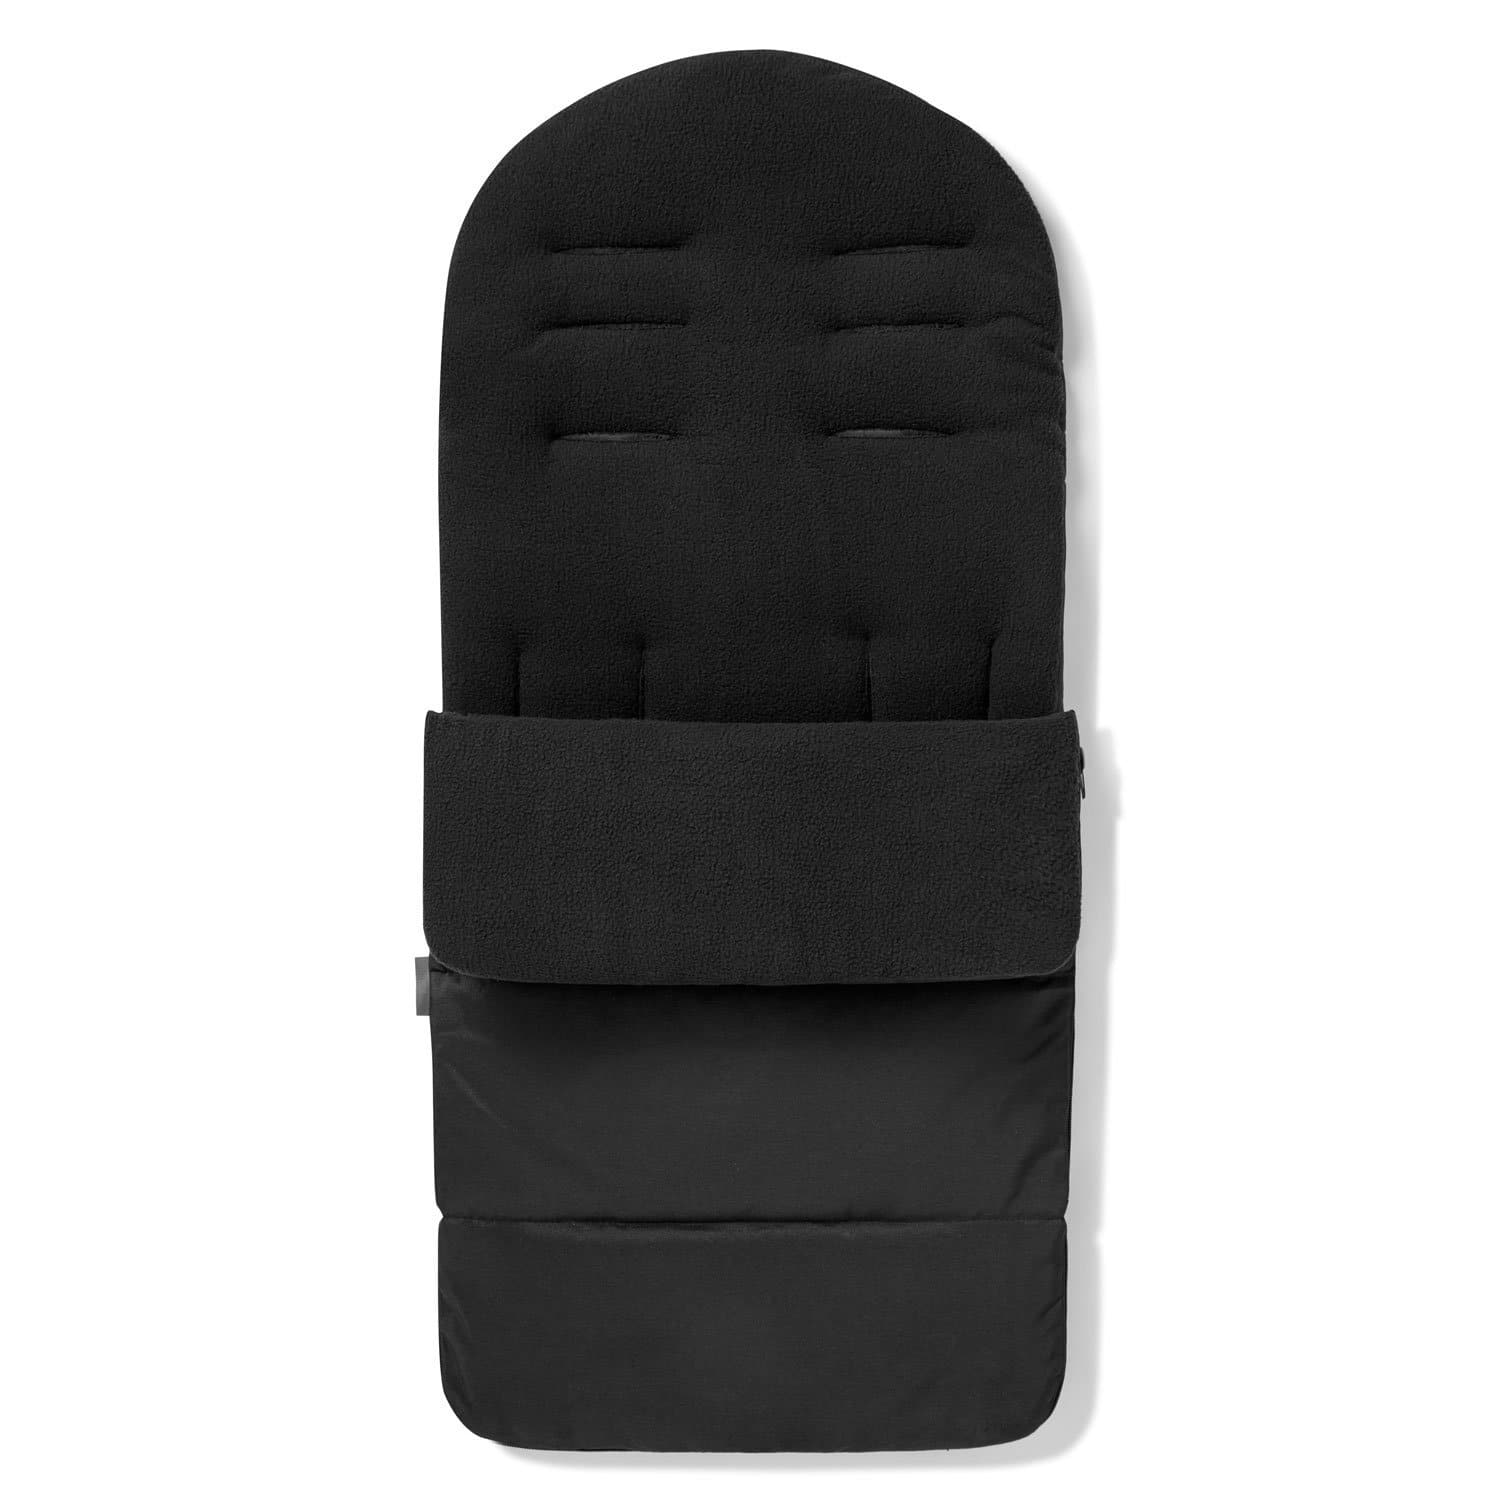 Premium Footmuff / Cosy Toes Compatible with Little Shield - For Your Little One